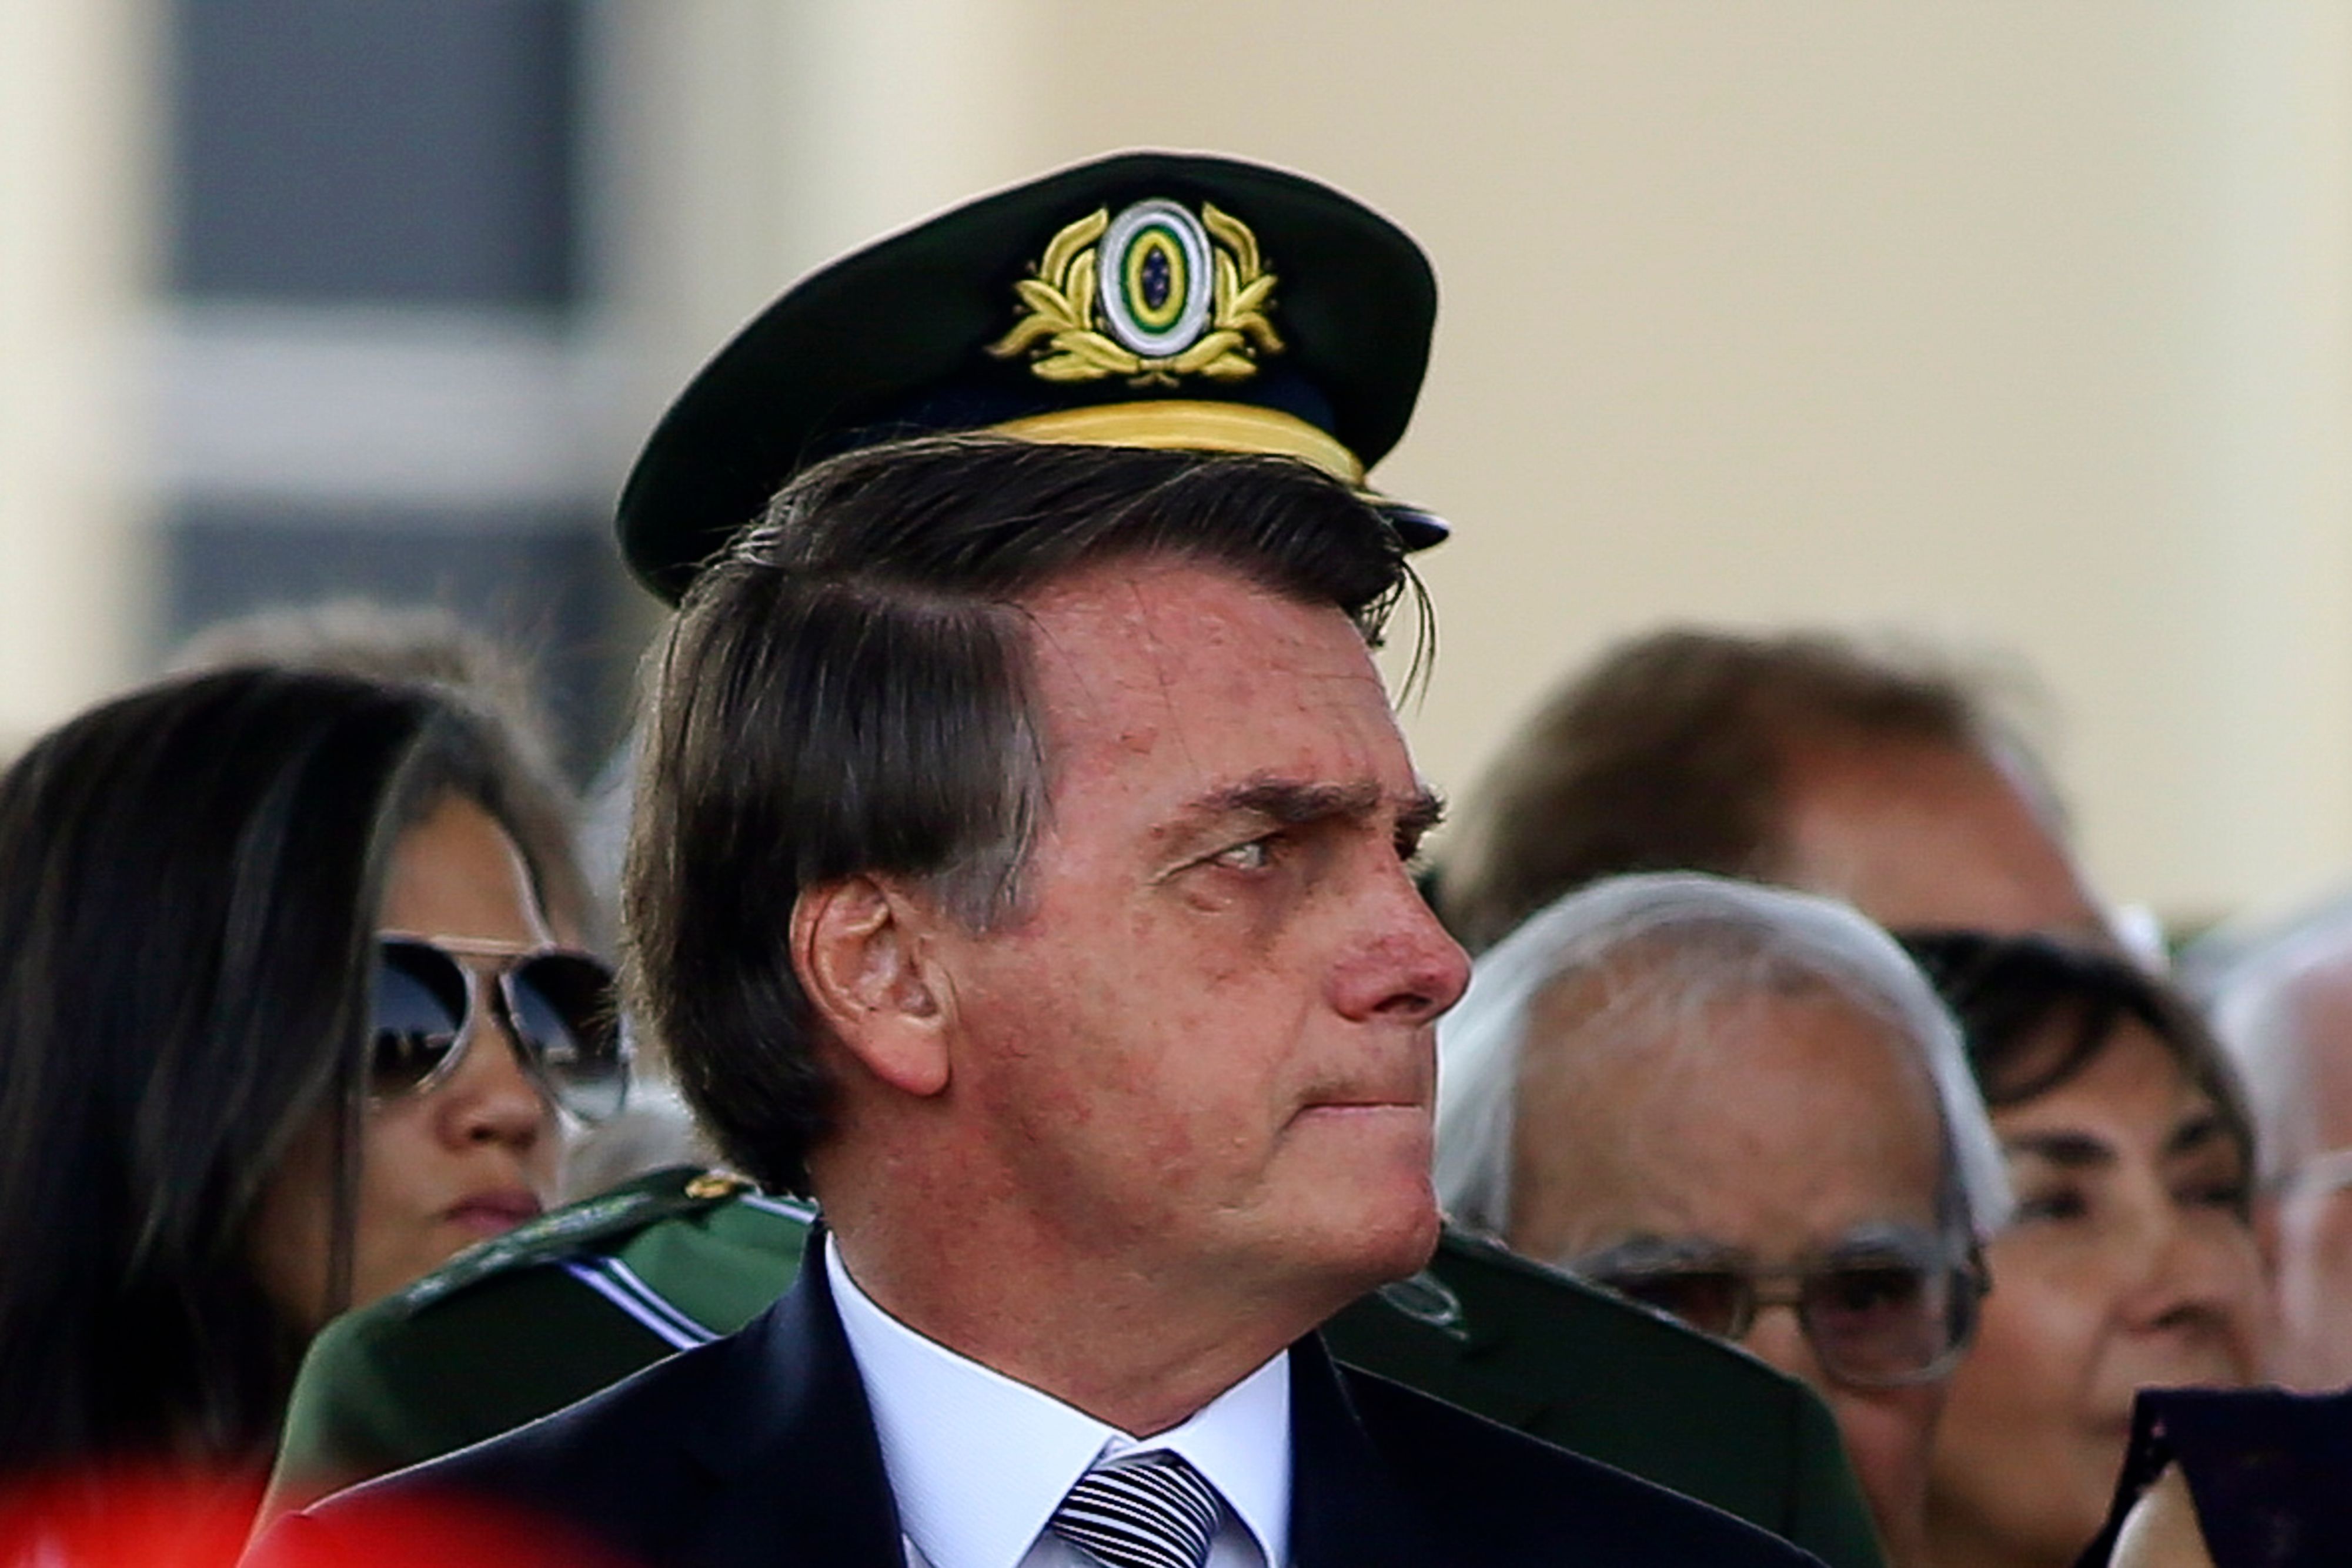 Brazilian President Jair Bolsonaro receives military honors during a military ceremony for Soldier Day at Army Headquarters in Brasilia, Brazil, Friday, August 23, 2019. Brazilian President Jair Bolsonaro says he is inclined to send the army to help fight fires in the Amazon that have scared people around the world. Sergio Lima / AFP.Brazilian President Jair Bolsonaro receives military honors during a ceremony for the Soldier Day at the Brazilian Army Headquarters in Brasilia, Brazil, on August 23, 2019. - Brazilian President Jair Bolsonaro says he is inclined to send the army to help fight fires in the Amazon that have scared people around the world. (Photo by Sergio LIMA / AFP)